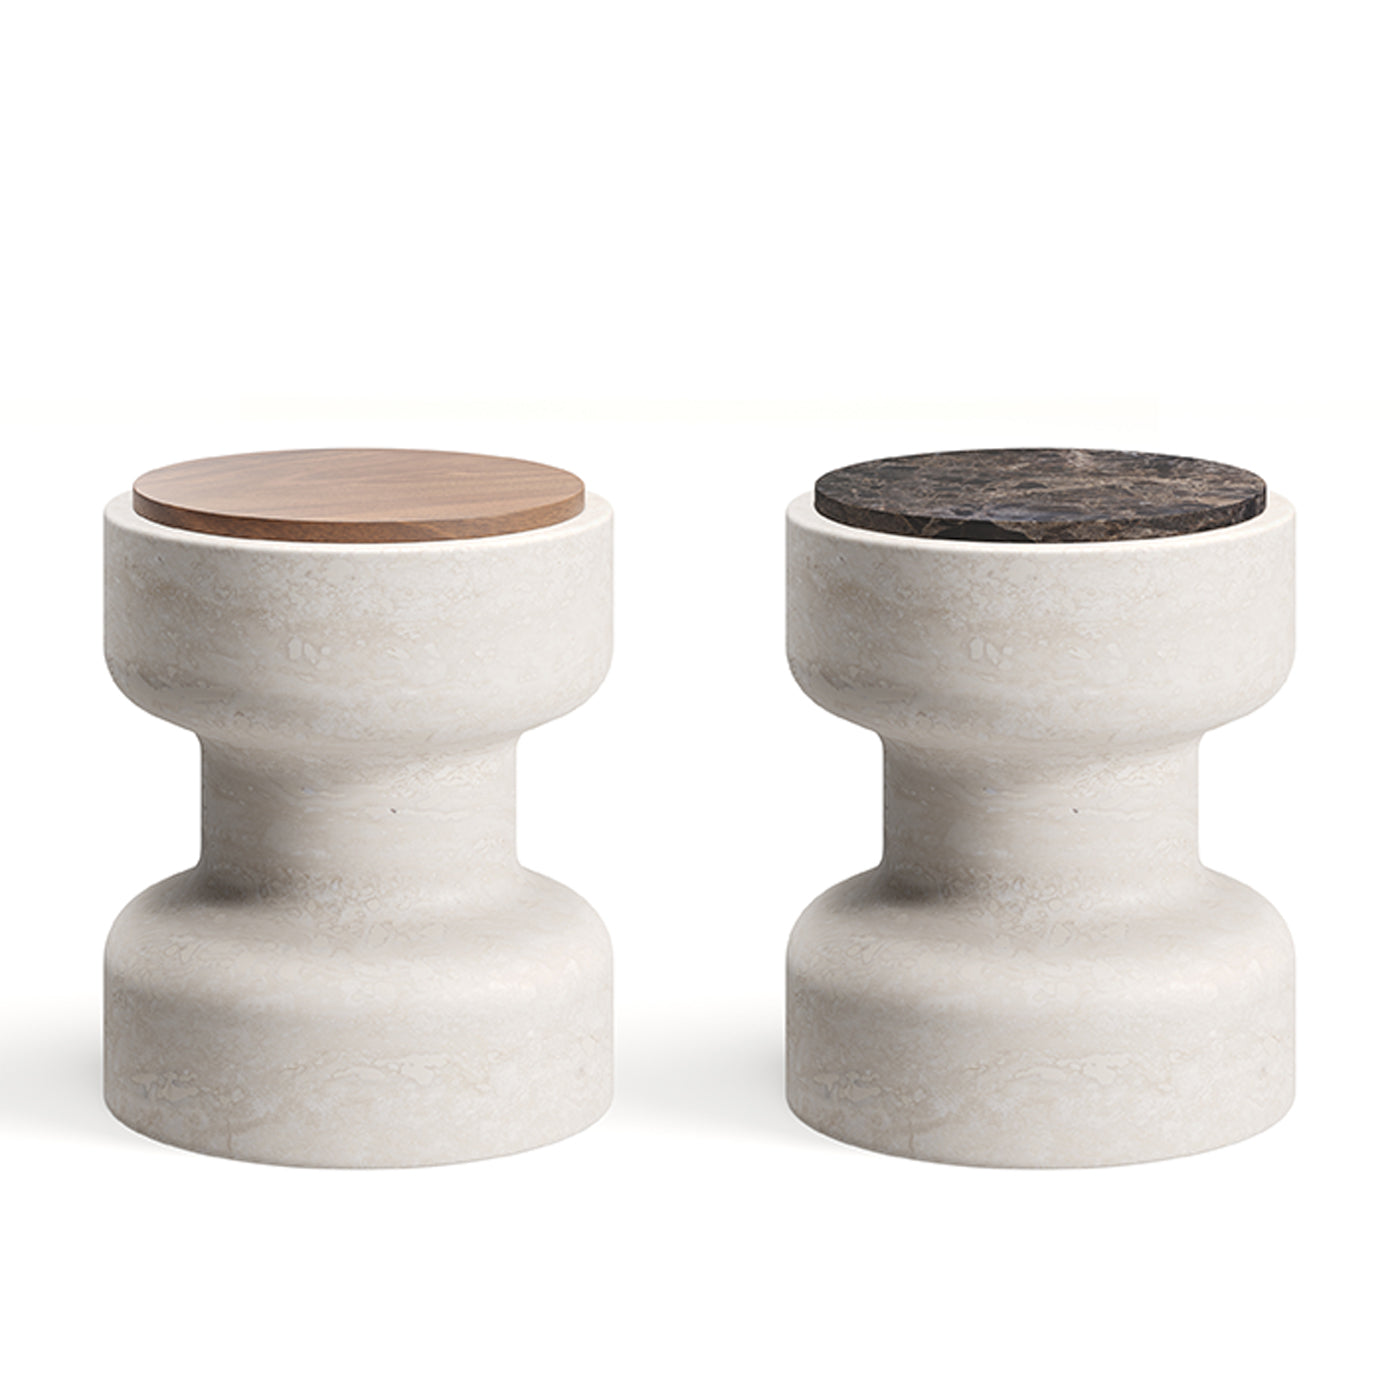 Tivoli Stool in travertine and marble by Ivan Colominas - Alternative view 1